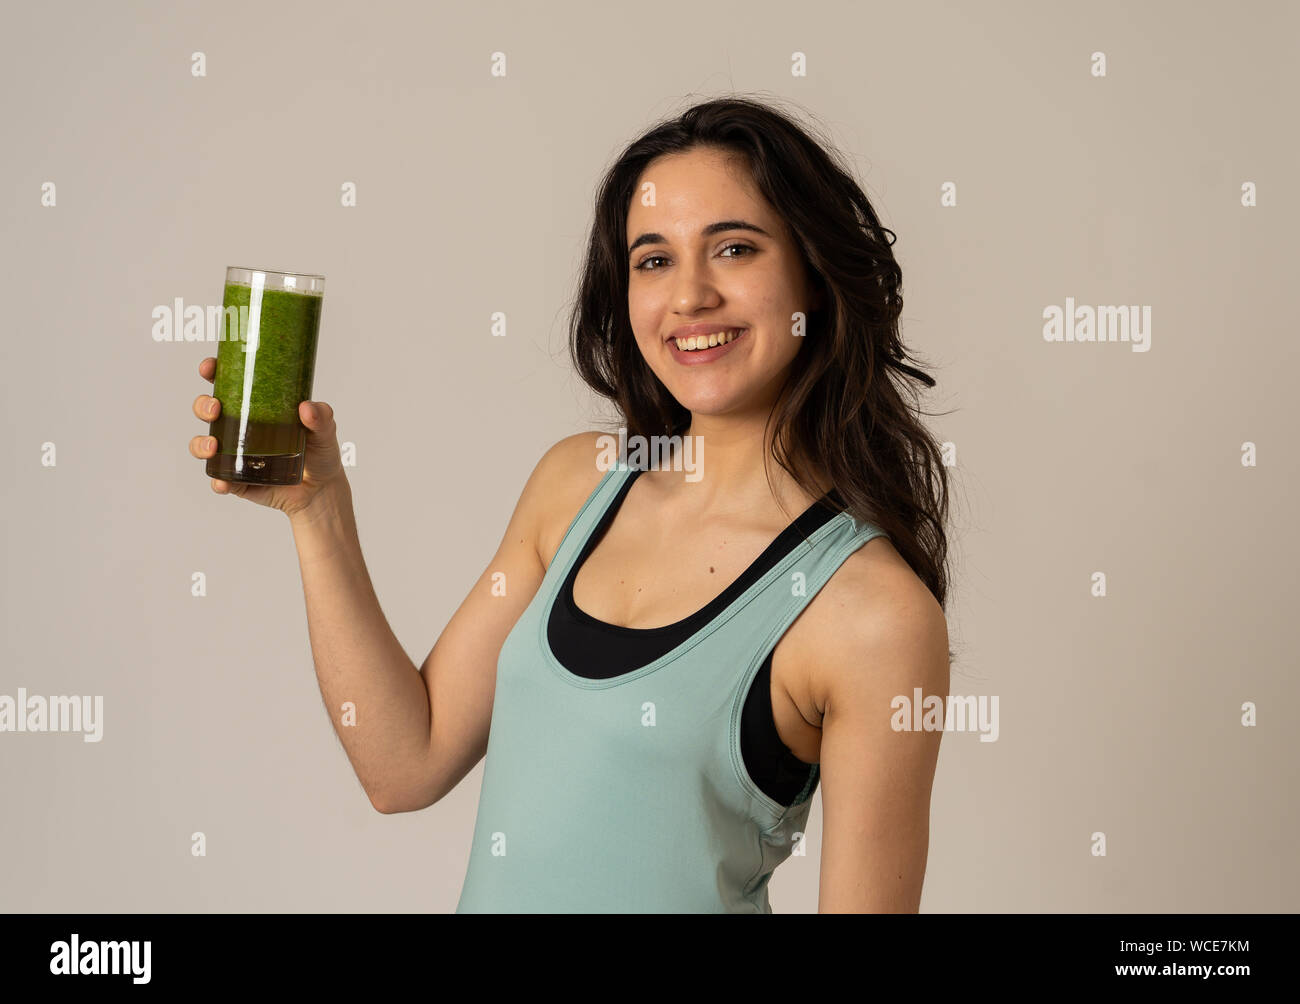 Fitness woman happy smiling holding glass of green vegetable smoothie after running or workout. Portrait isolated with copy space. Beauty Health Fitne Stock Photo